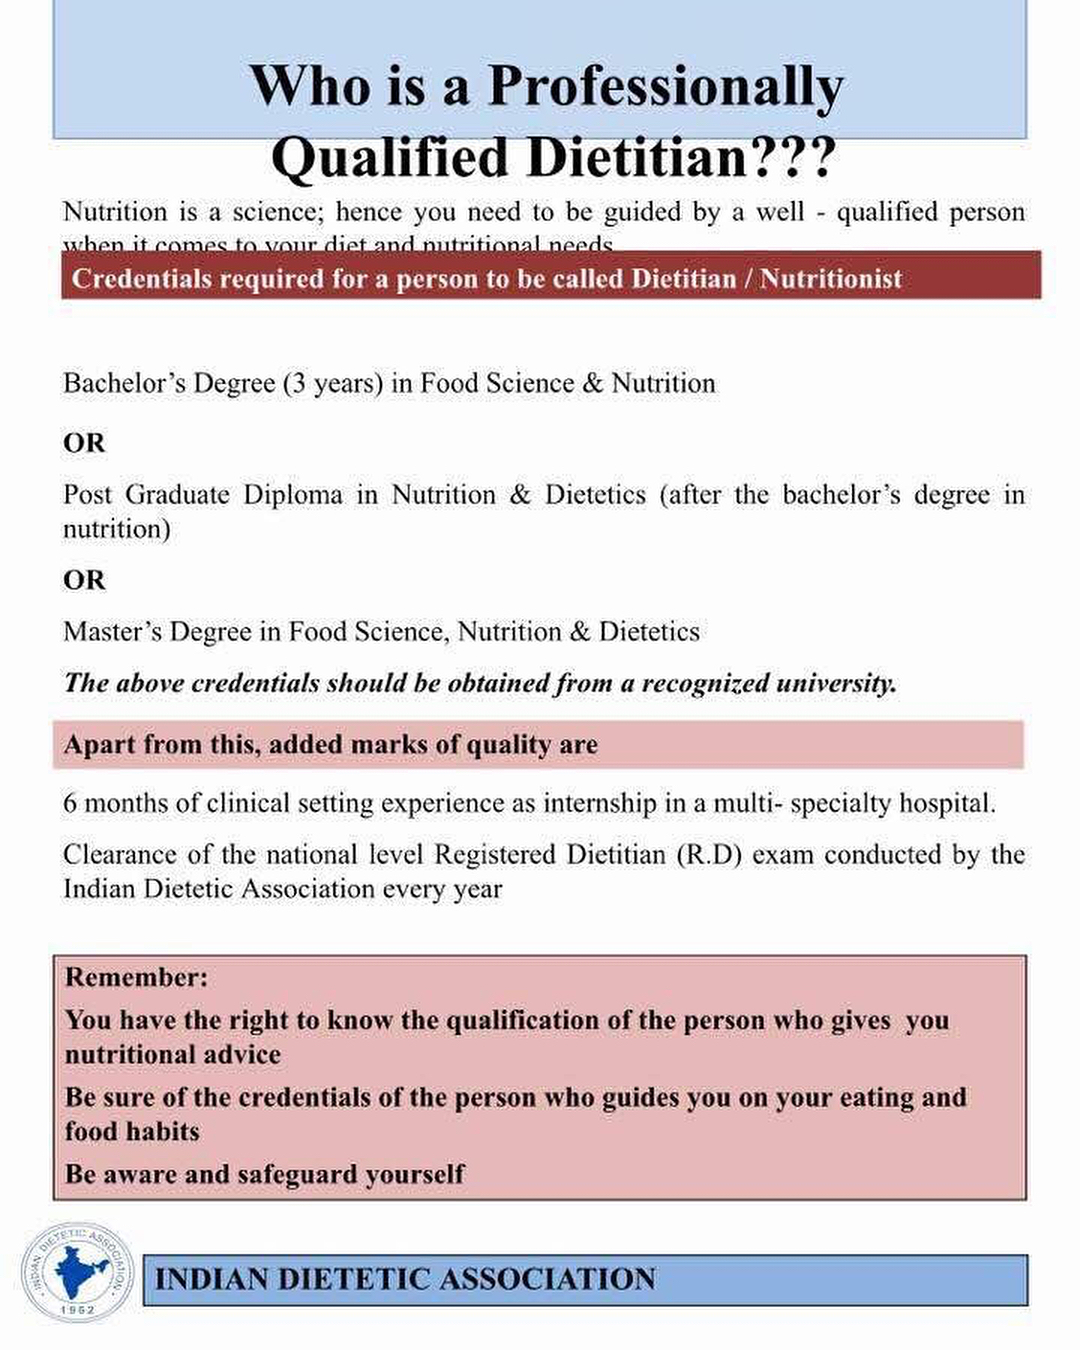 How to chose a right dietitian for you.
#dietitian #ida #nutrition #dietitianapproved #dietitiannutritionist #indiandietitian